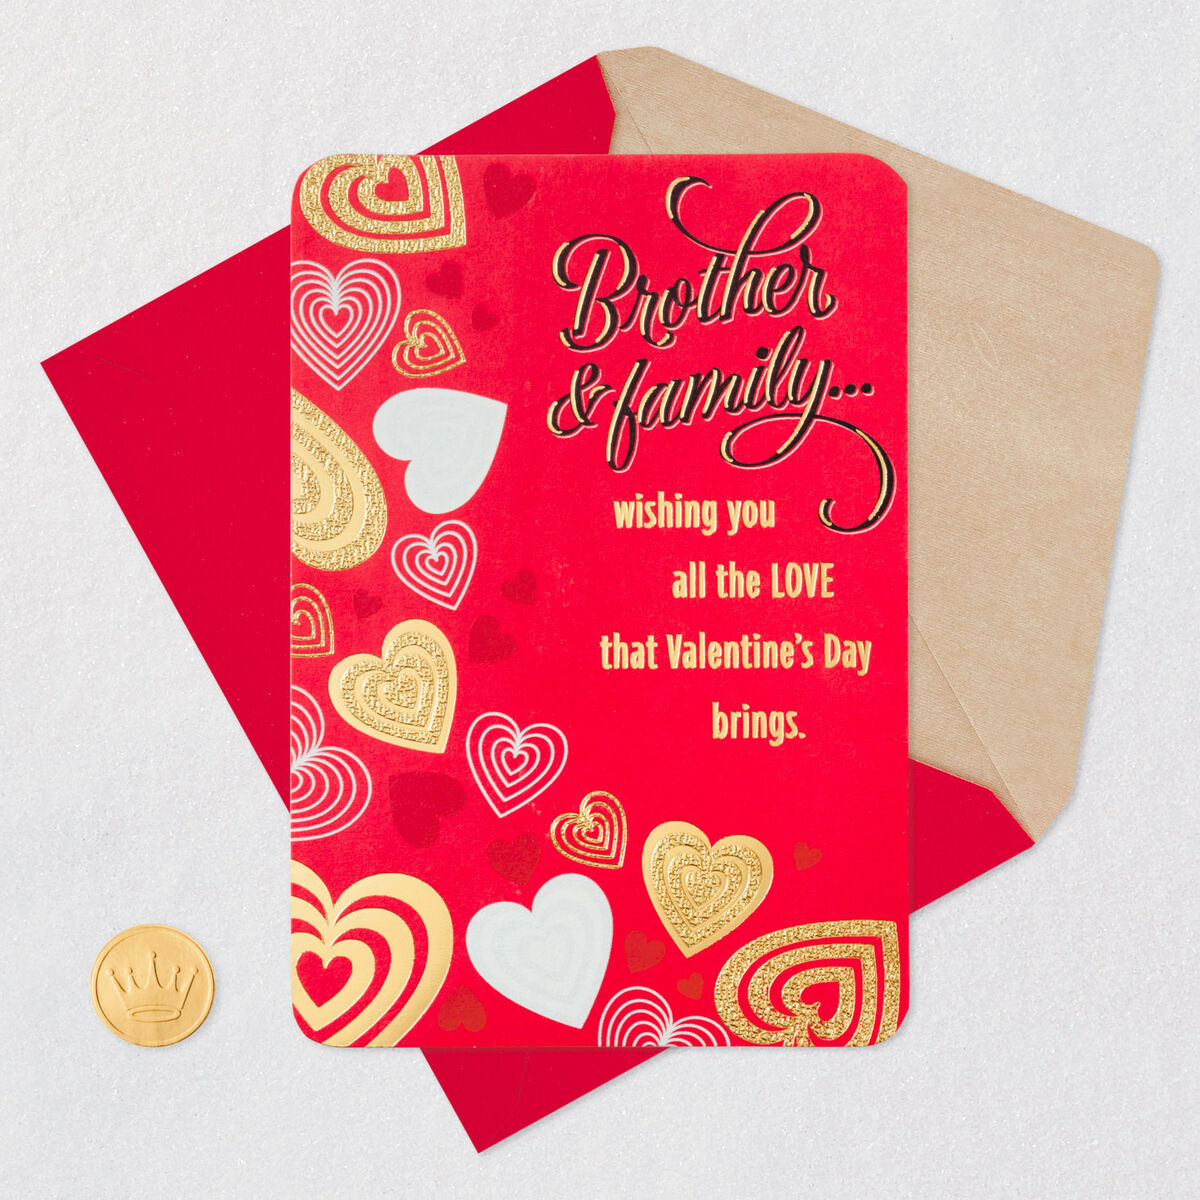 love-and-happiness-valentine-s-day-card-for-brother-and-family